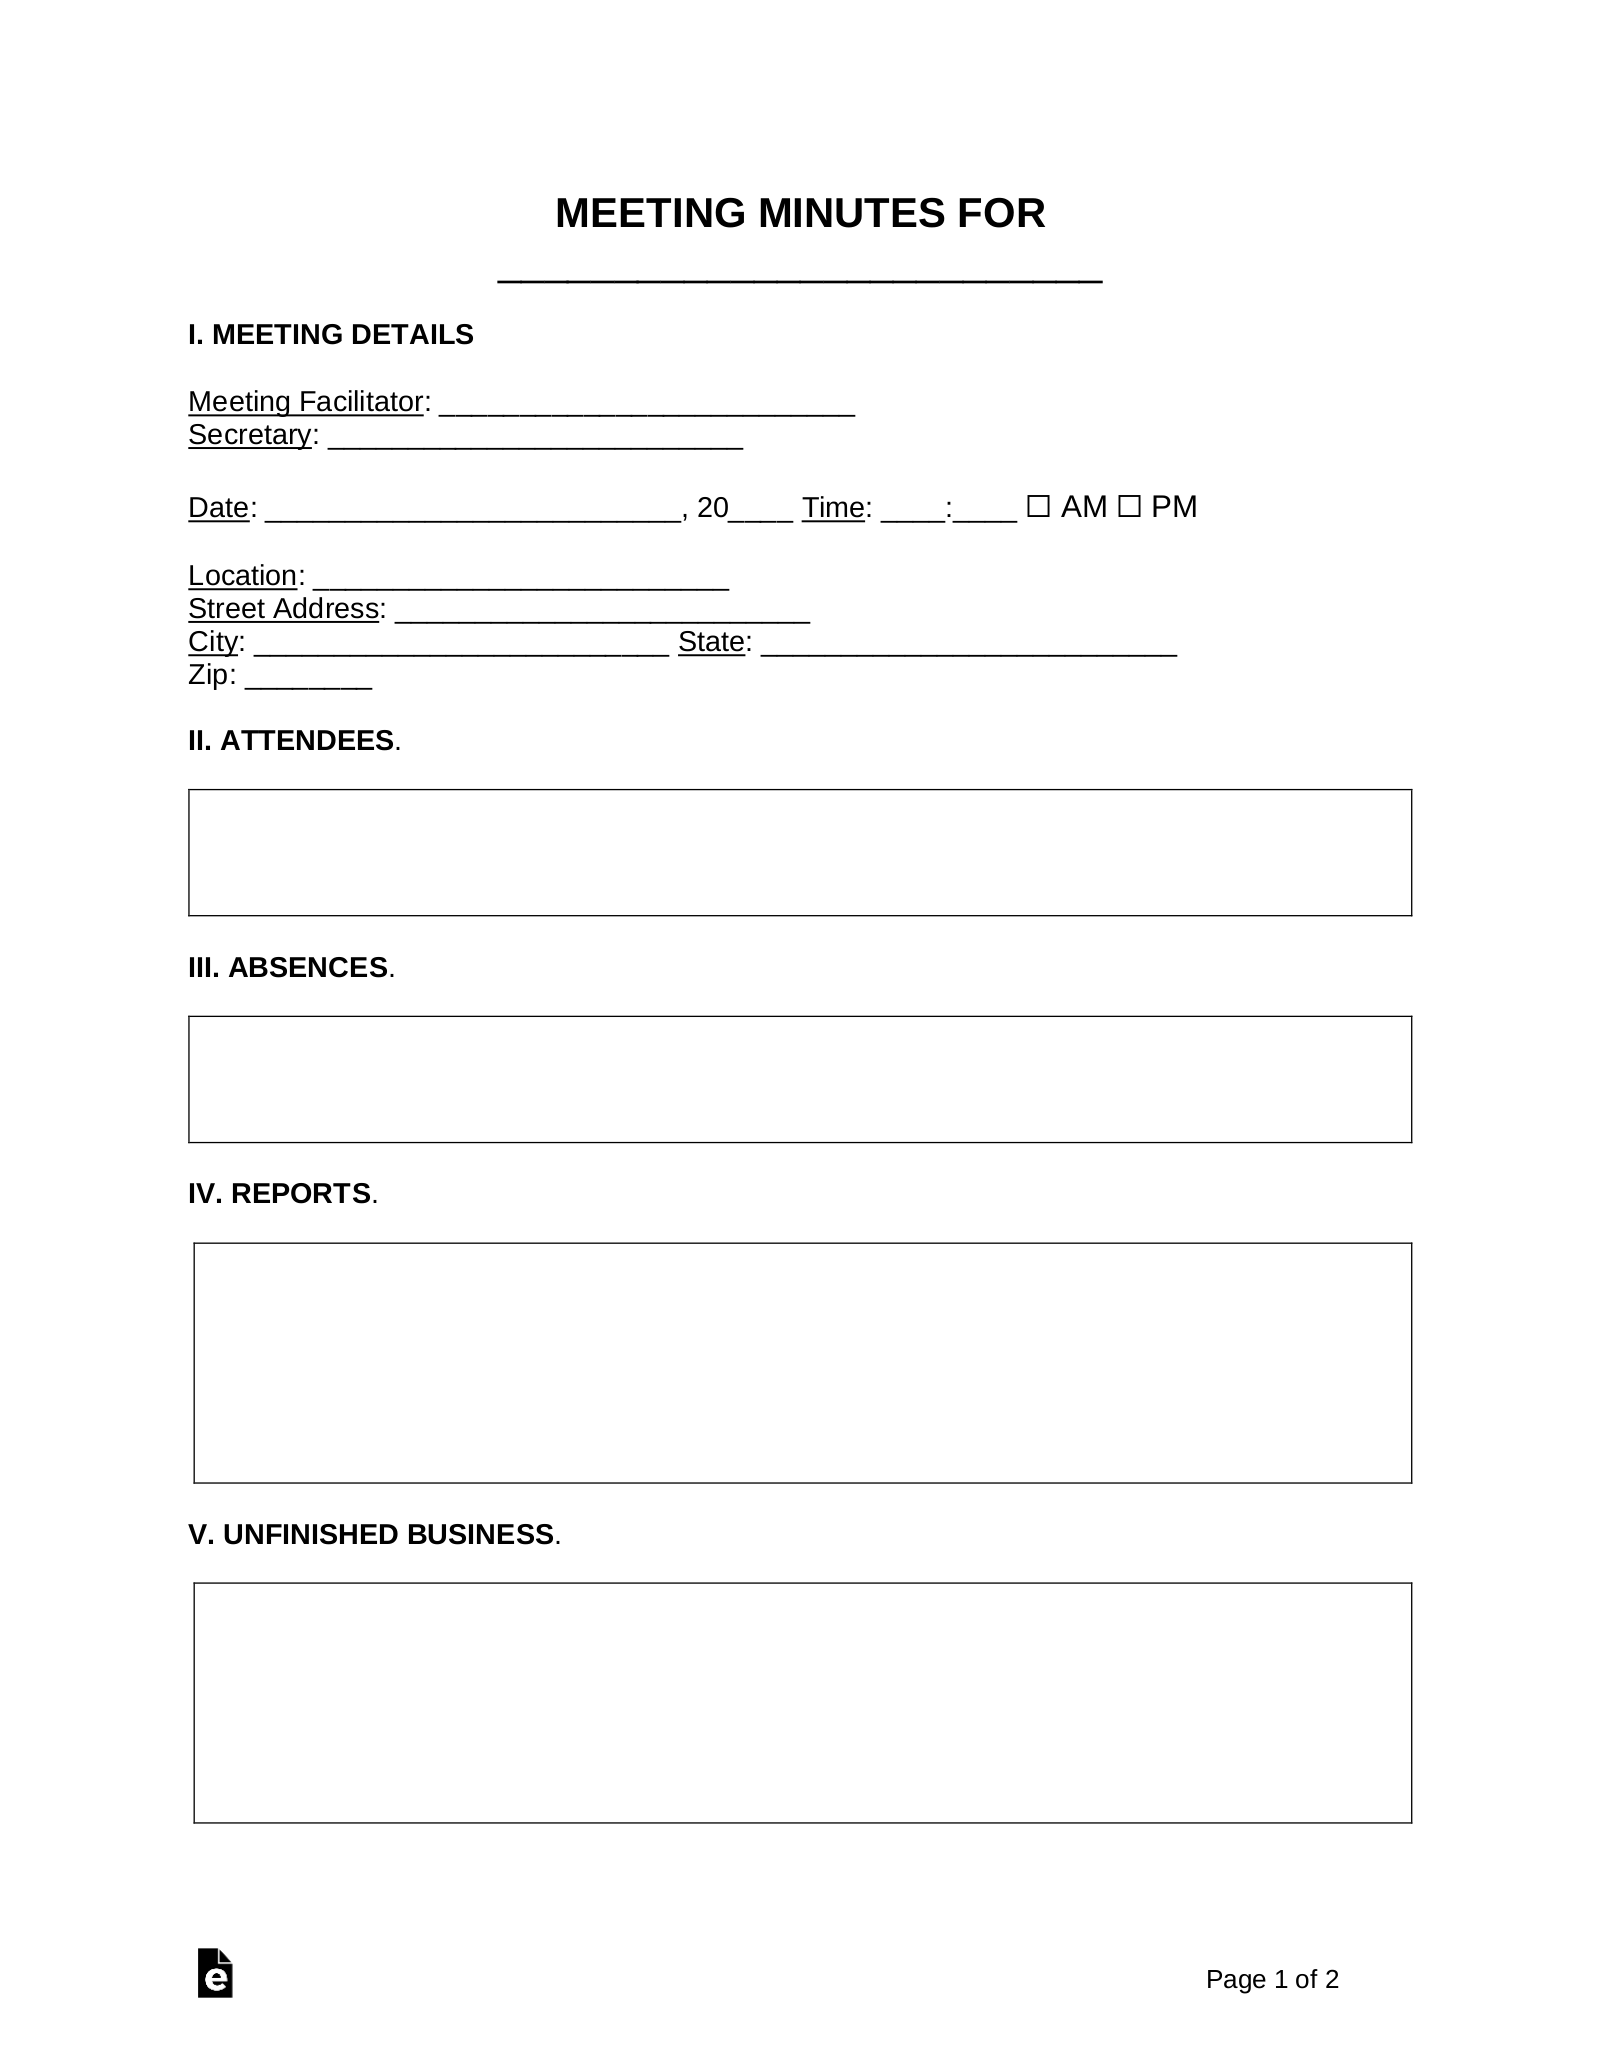 Meeting Minutes Template 